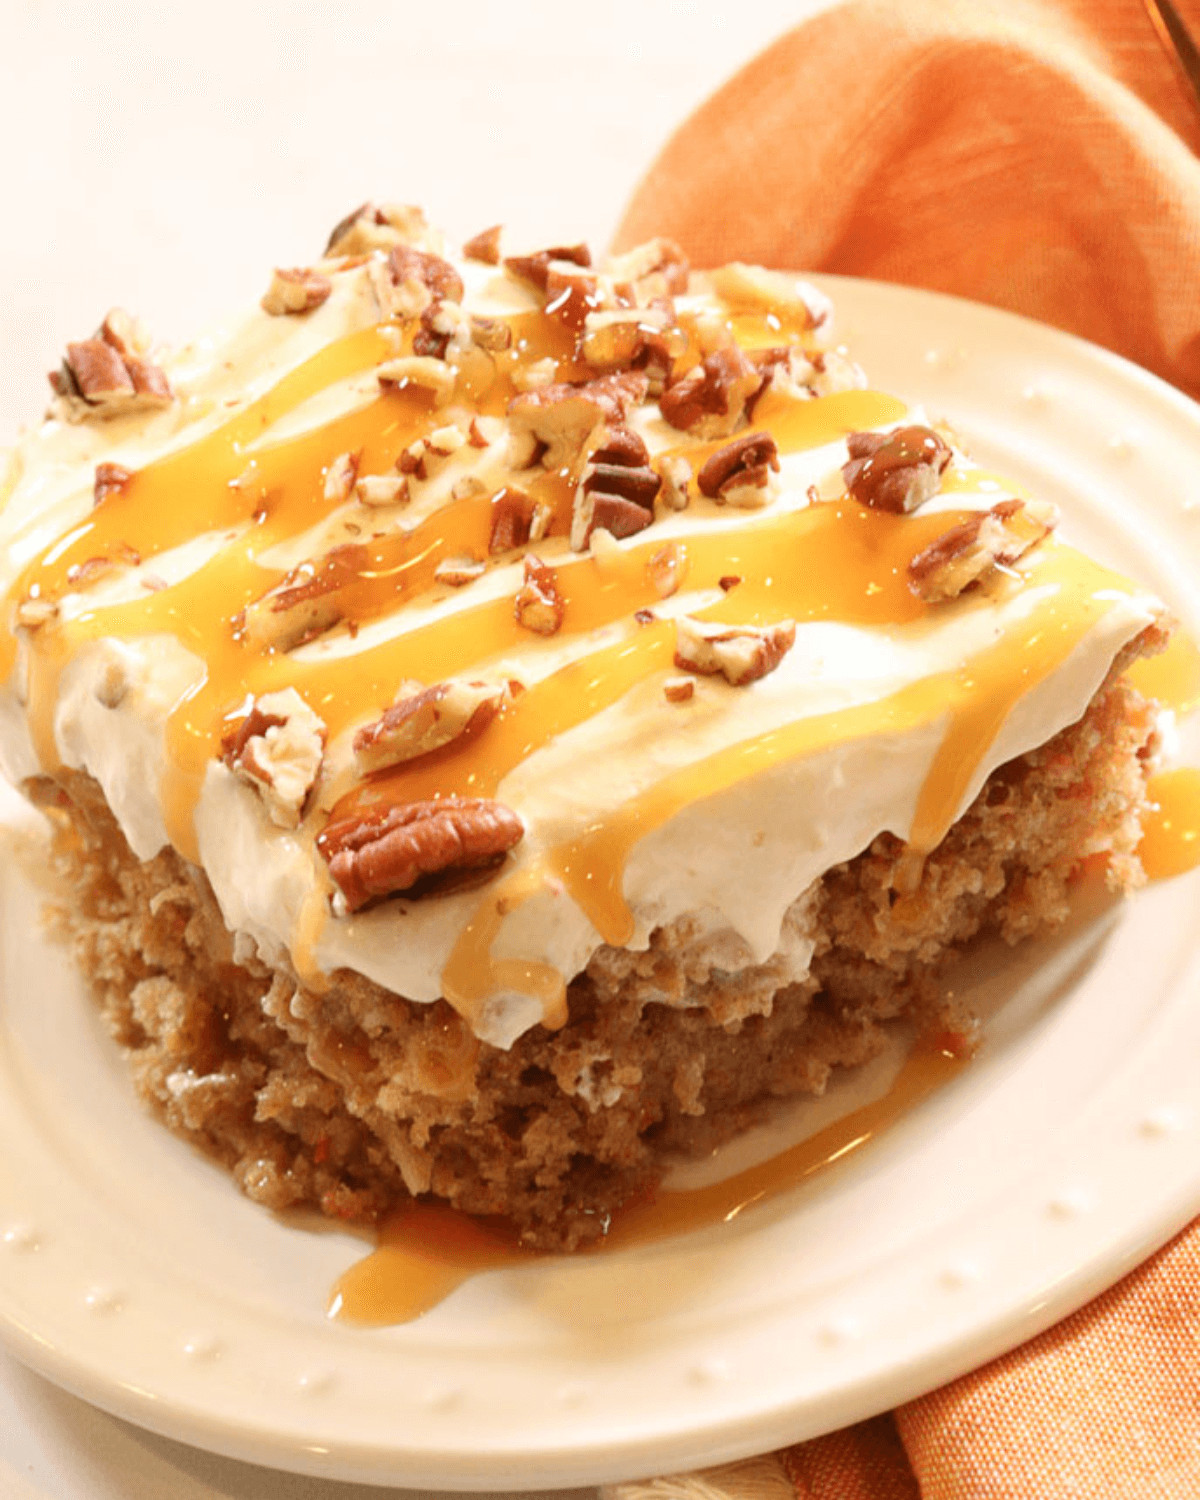 Slice of carrot poke cake with cream cheese frosting, caramel drizzle, and chopped pecans on a white plate.